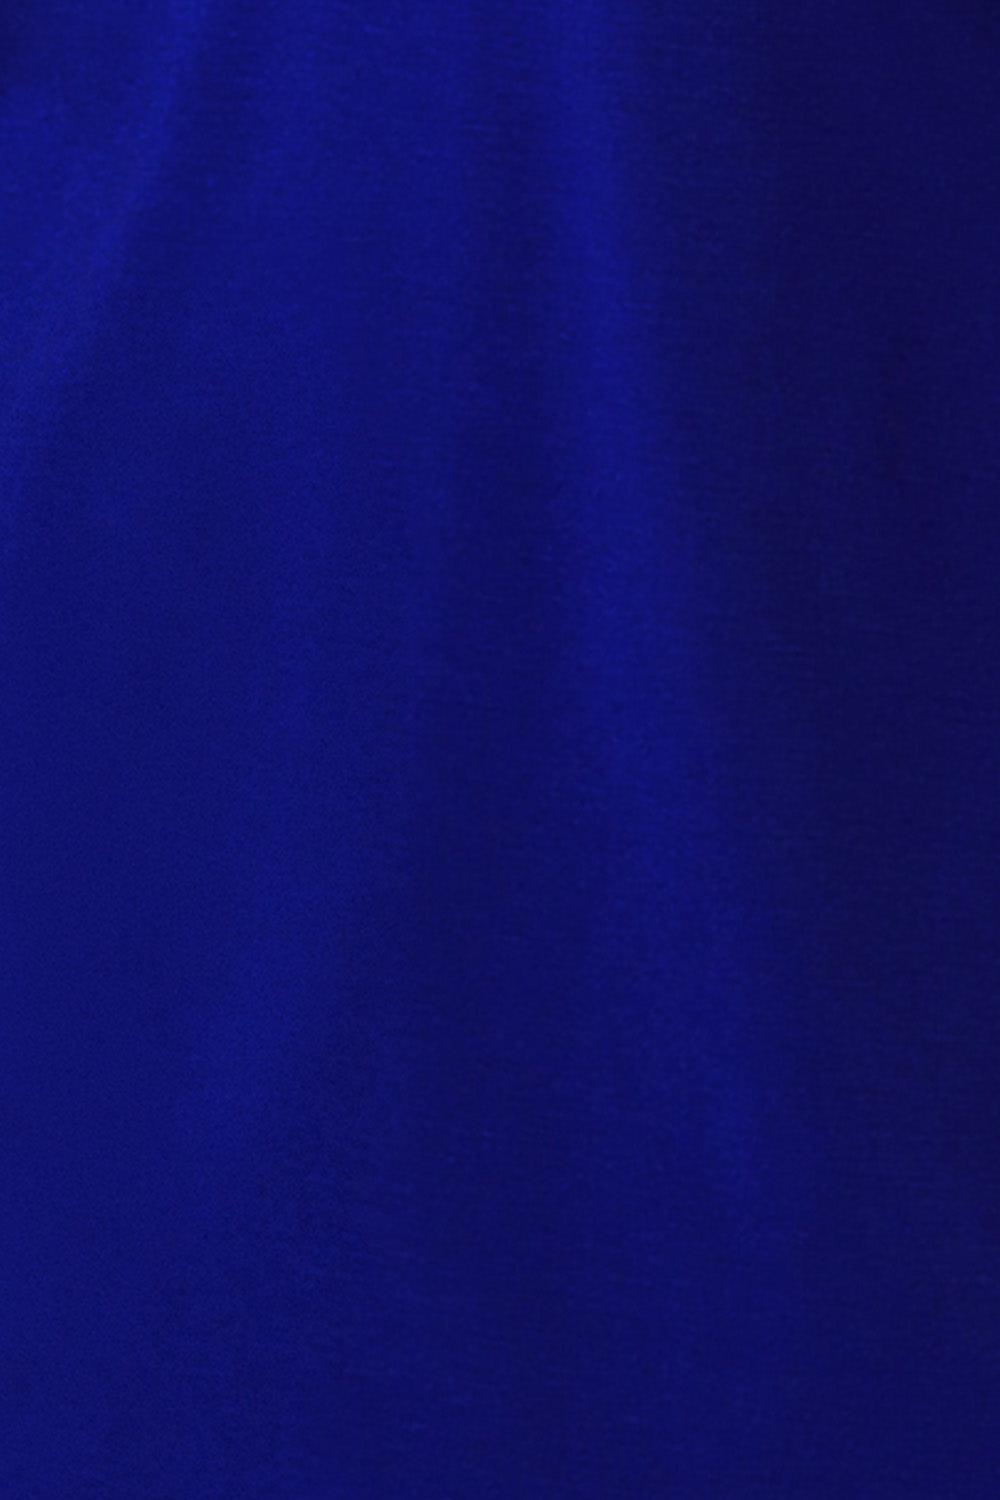 A cobalt bamboo jersey fabric swatch used by Australian-made women's clothing brand, L&F to make women's workwear tops and scarves.